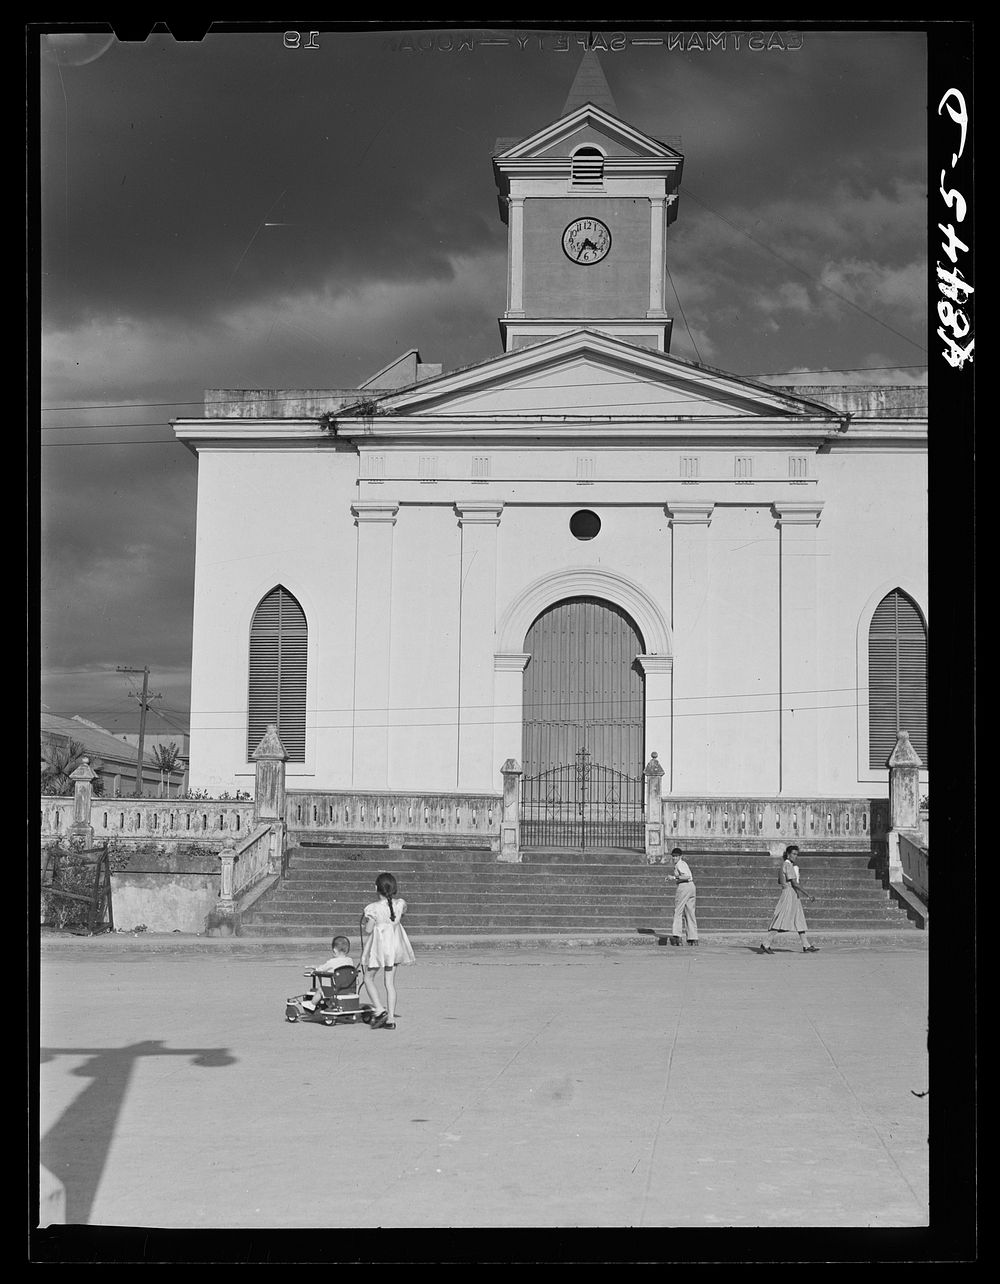 San Sebastian, Puerto Rico. On the plaza in front of the church. Sourced from the Library of Congress.